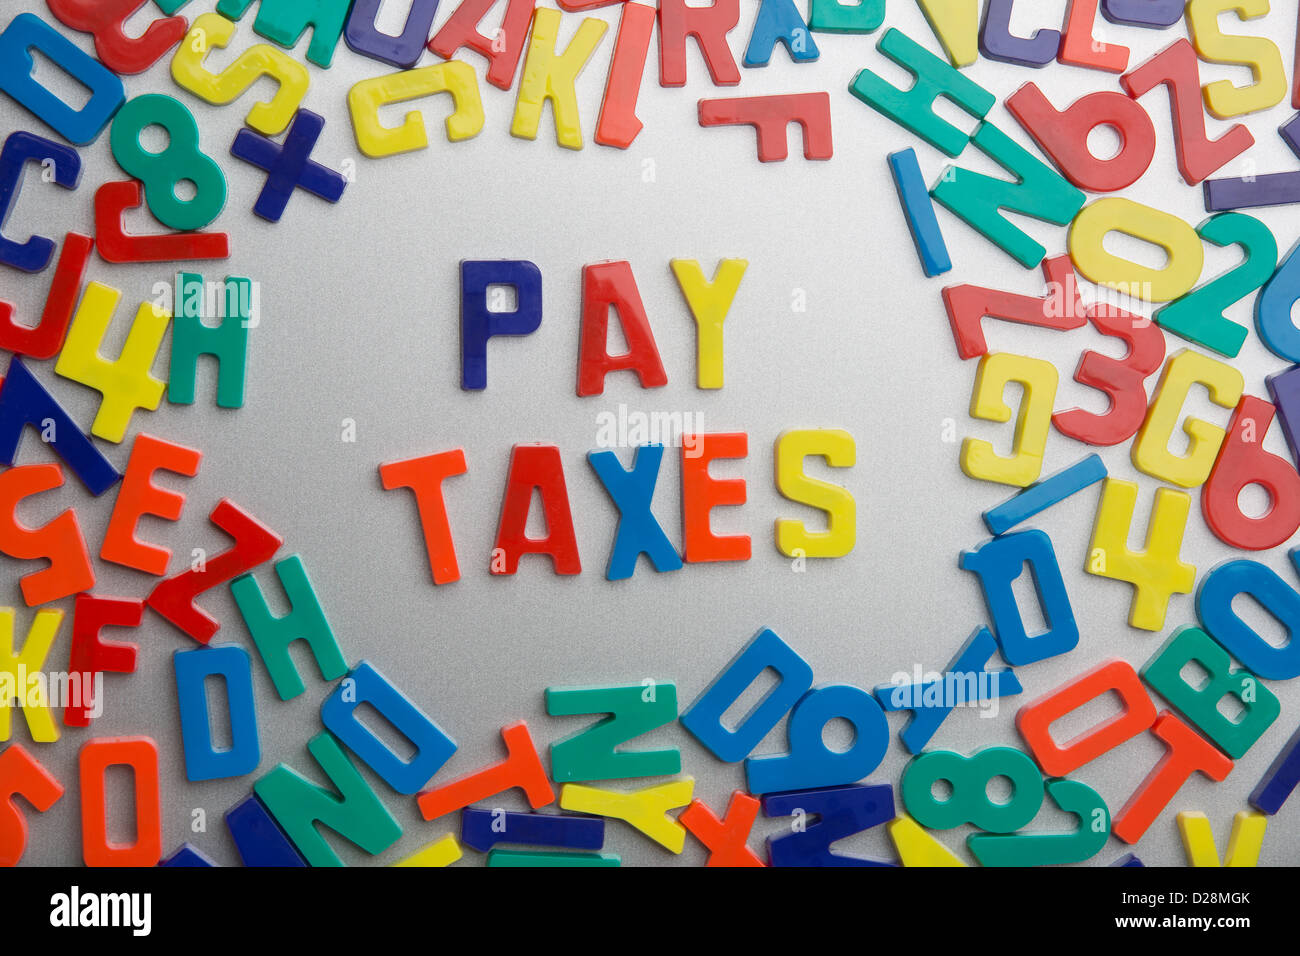 'Pay Taxes' - Refrigerator magnets spell messages out of a jumble of letters Stock Photo